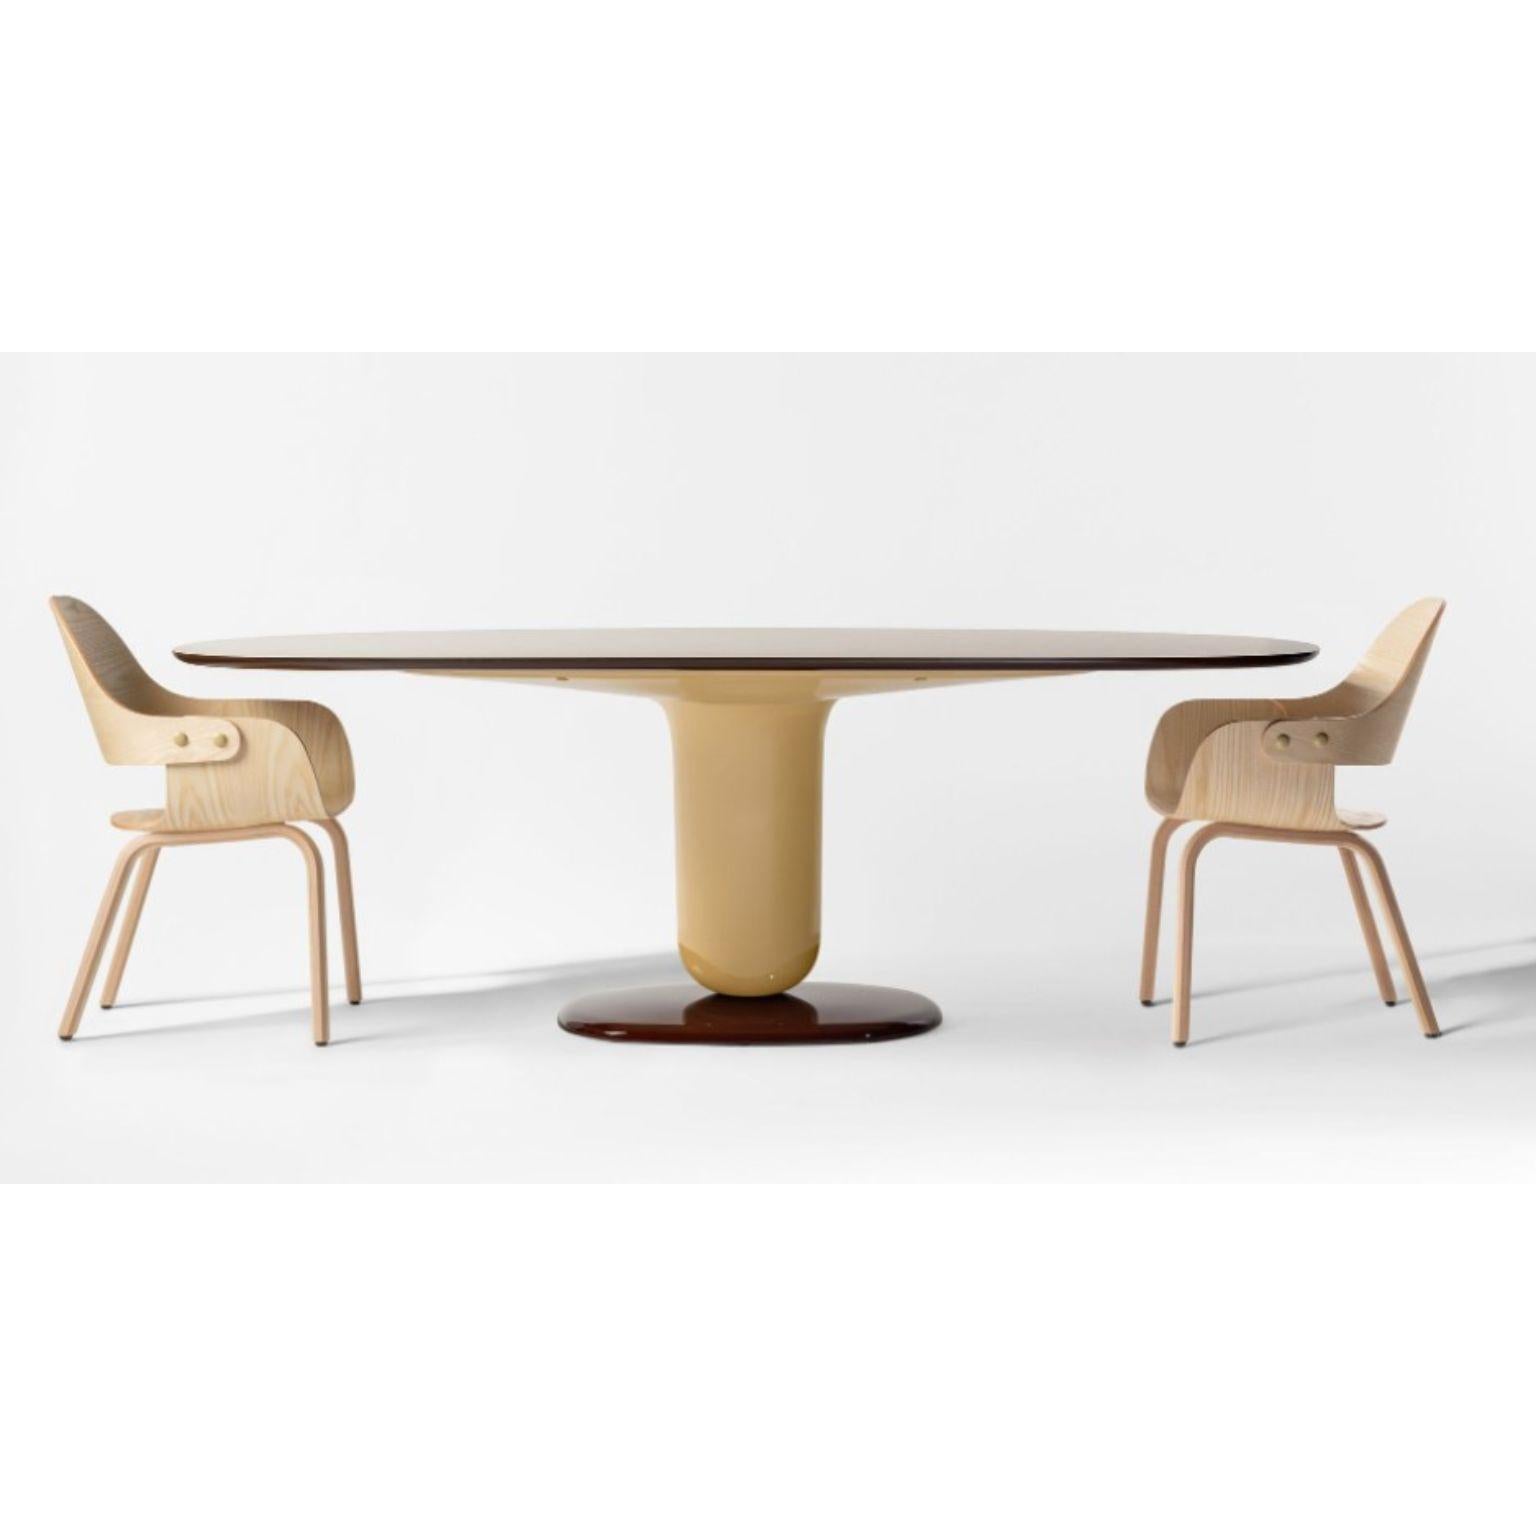 Set of explorer 5B dining table and showtime nude chairs by Jaime Hayon
Dimensions: D 100 x W 220 x H 74 cm and D 55 x W 52 x H 79 cm
Materials: Lacquered fiberglass body. Solid turned wooden legs and lacquered. Painted glass tabletop.
Chair: